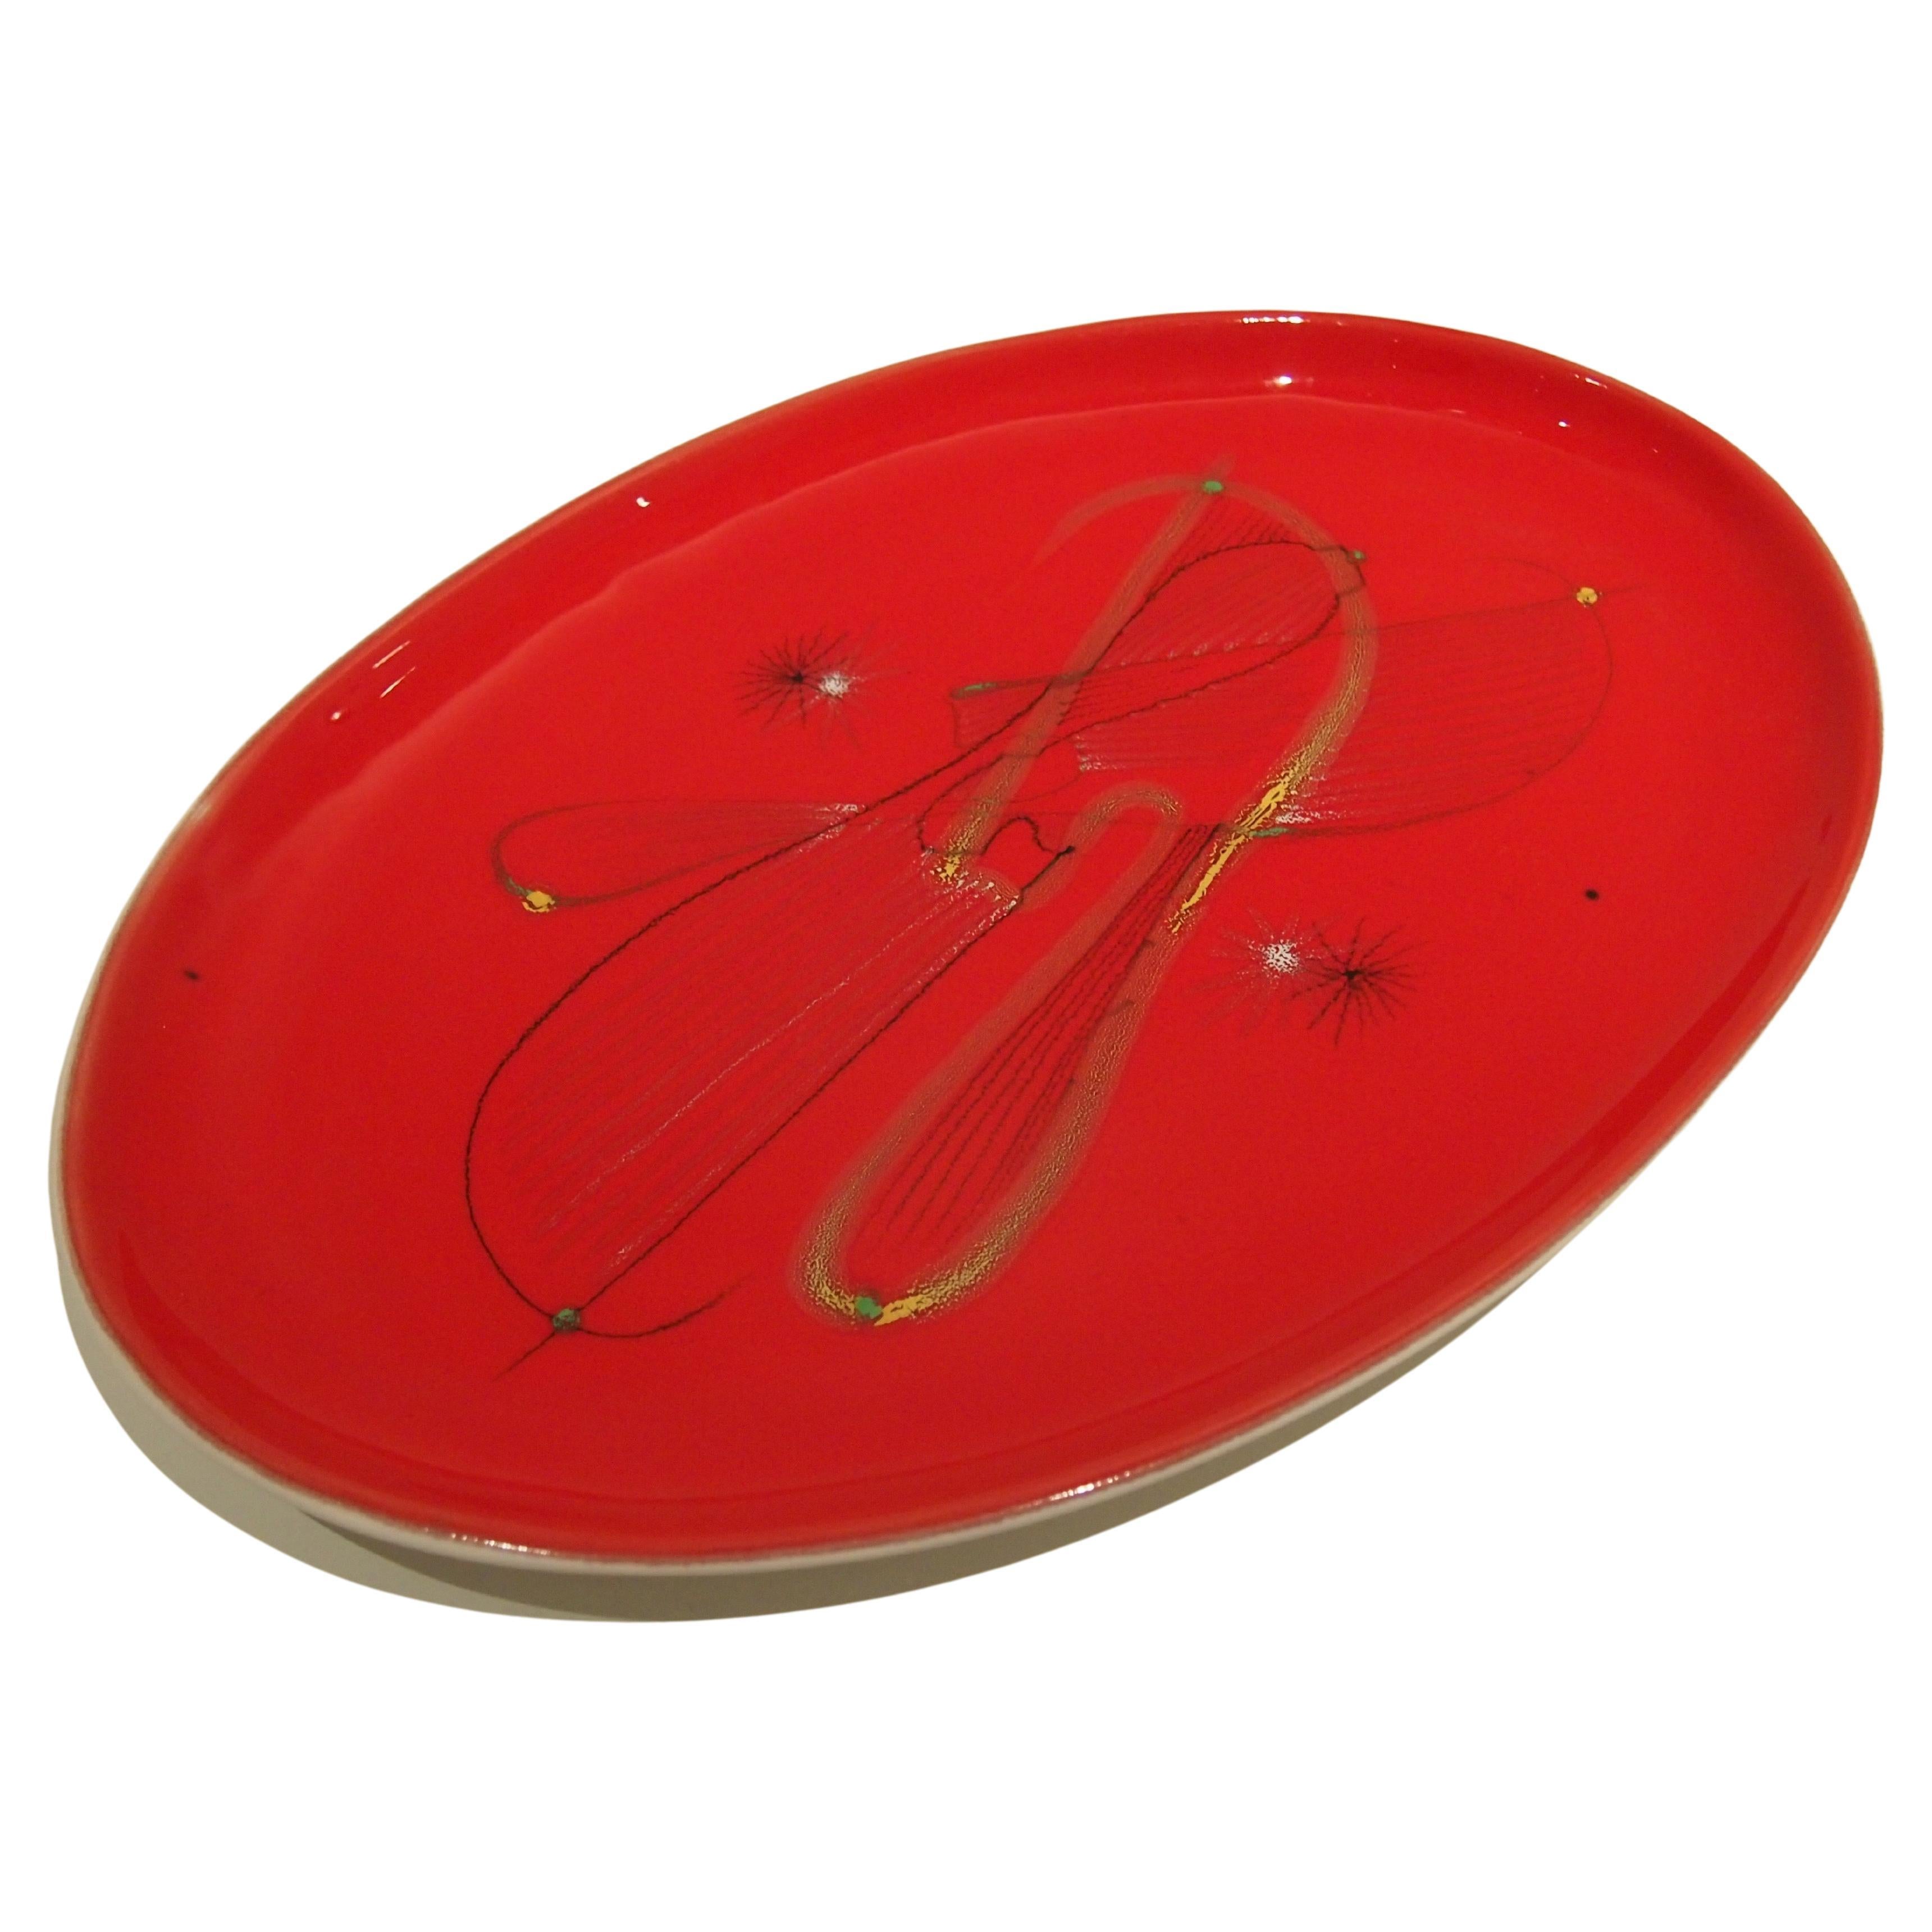 Ceramic Red Dish by André Baud, Vallauris, 1950s For Sale